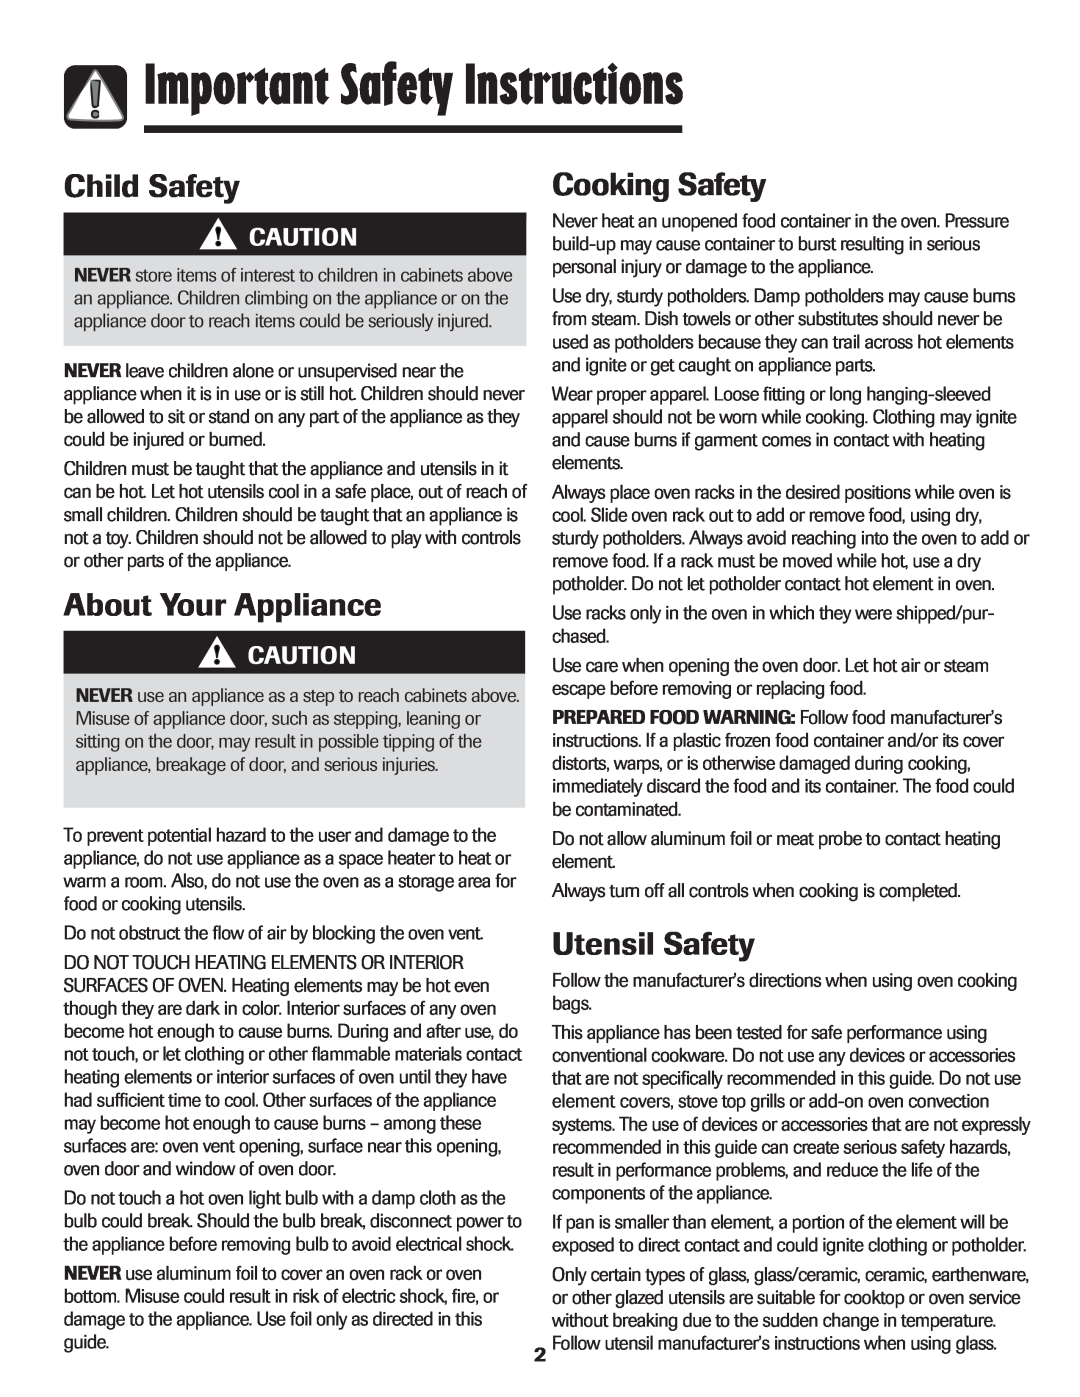 Maytag MER5552BAW Important Safety Instructions, Child Safety, About Your Appliance, Cooking Safety, Utensil Safety 